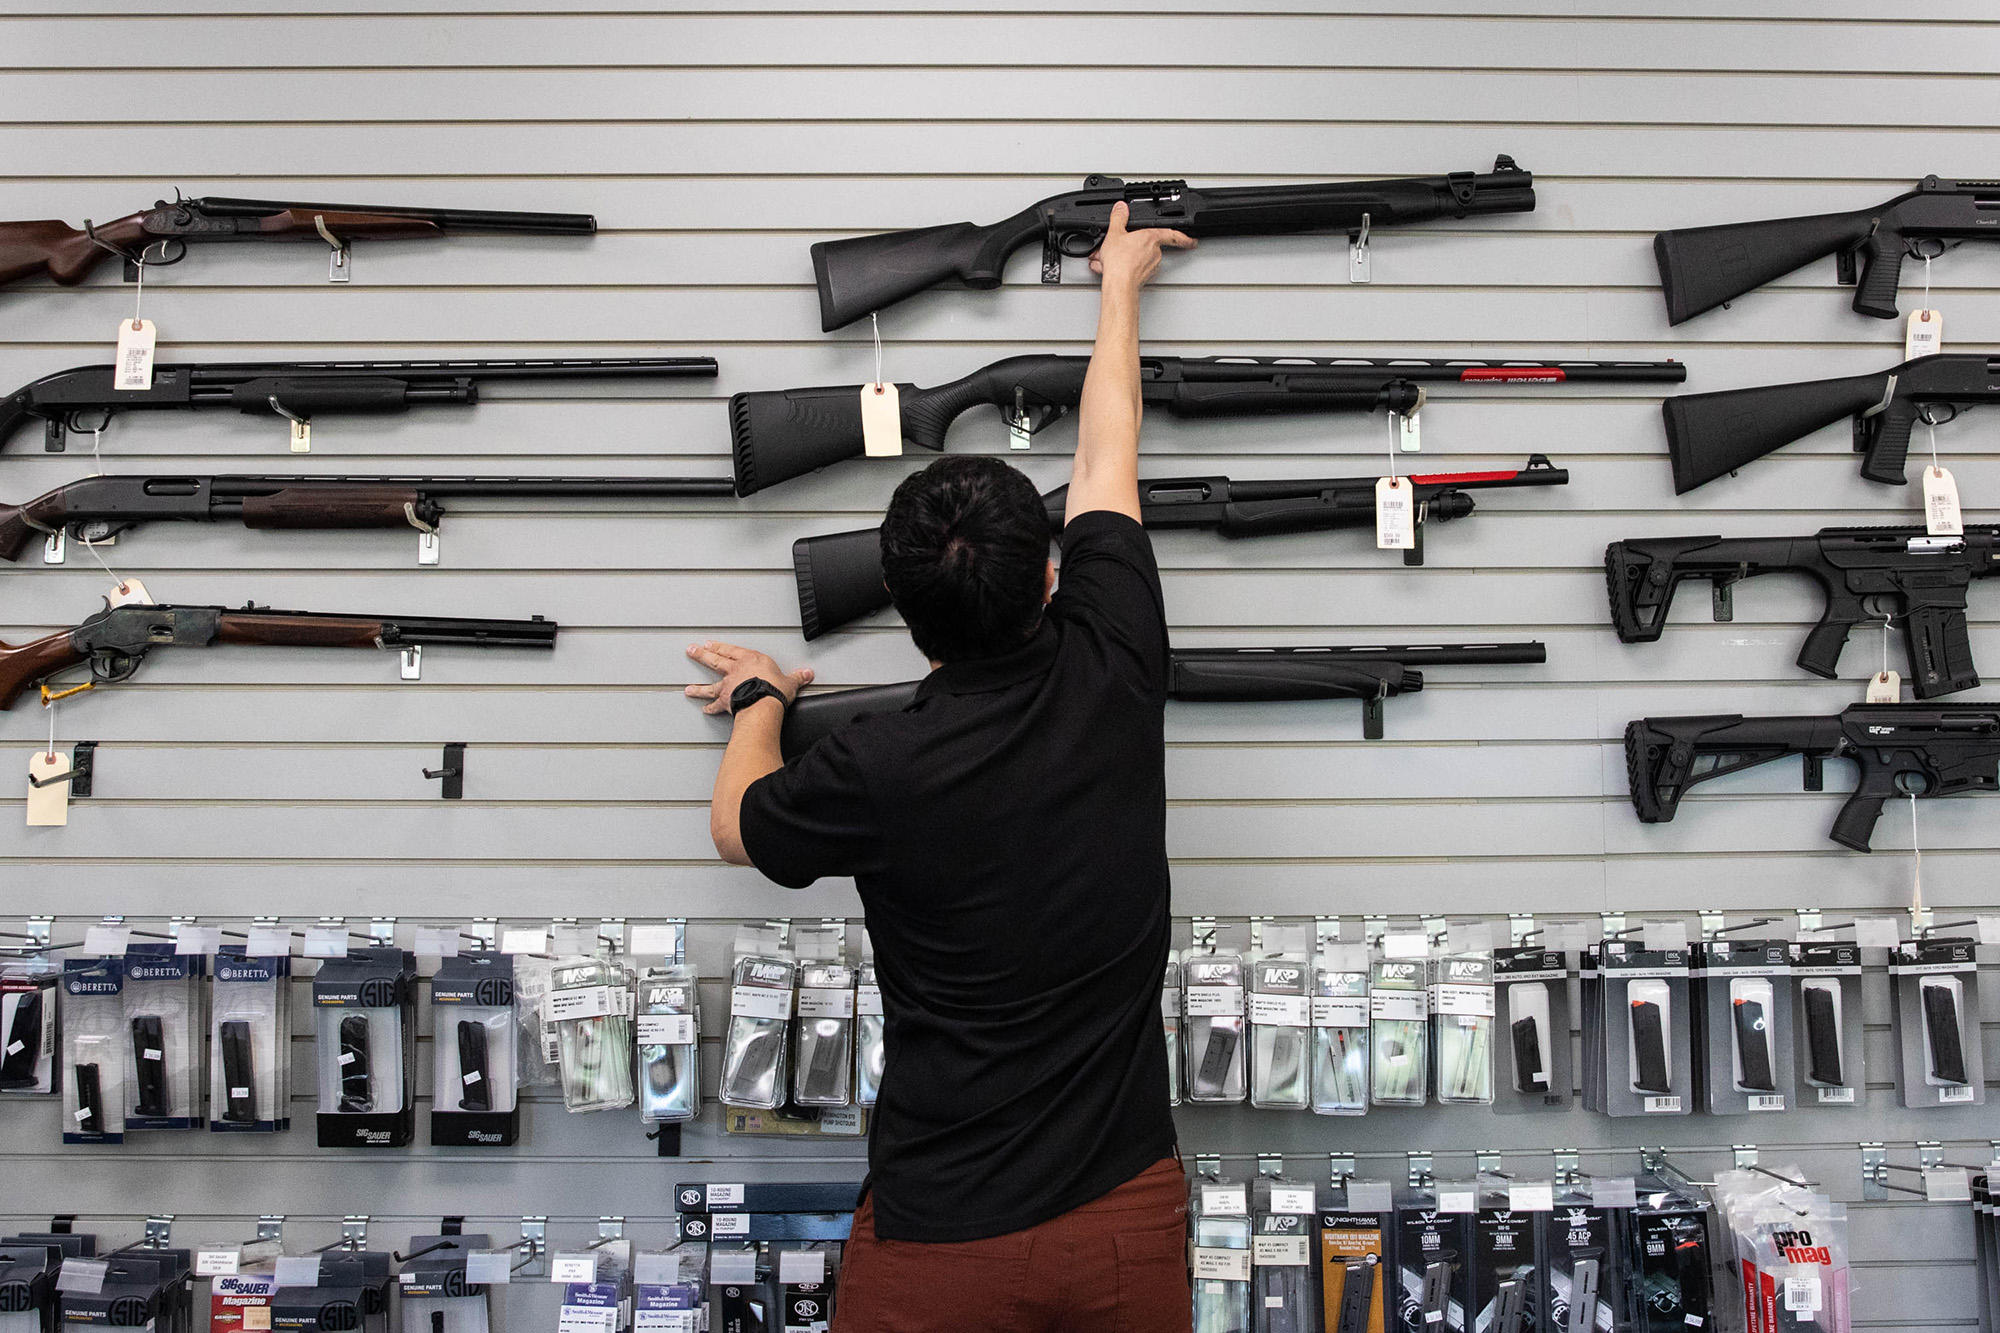 Shelved since 2018, this WA gun law may finally be implemented soon